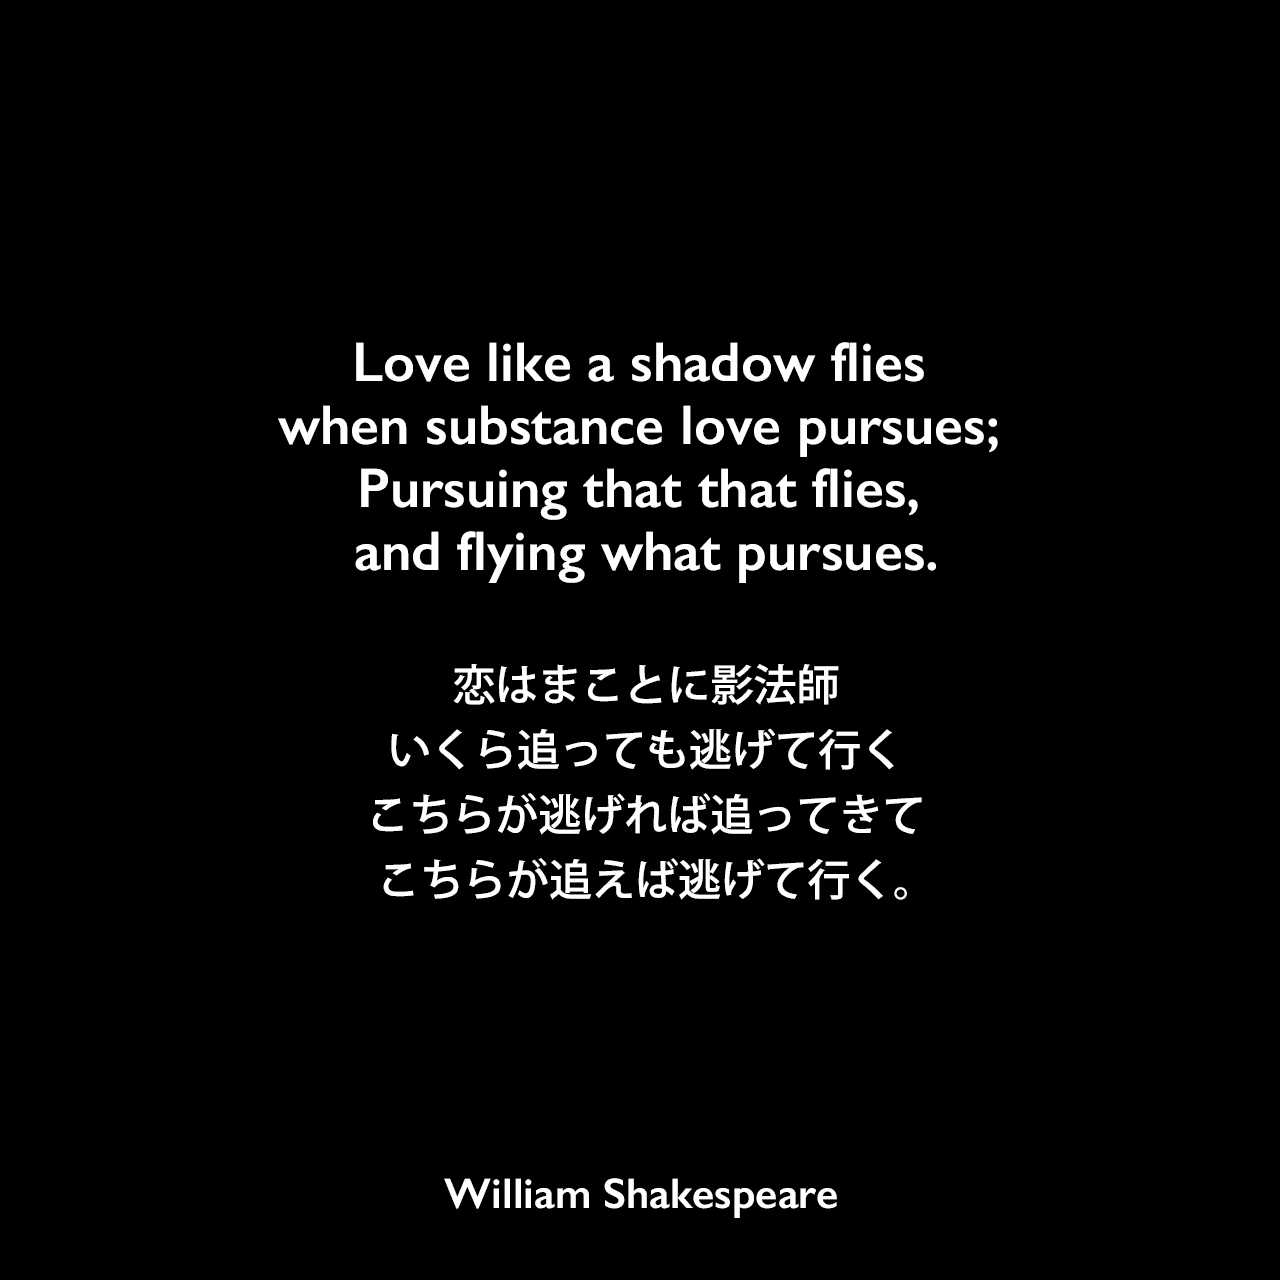 Love like a shadow flies when substance love pursues; Pursuing that that flies, and flying what pursues.恋はまことに影法師、いくら追っても逃げて行く、こちらが逃げれば追ってきて、こちらが追えば逃げて行く。William Shakespeare